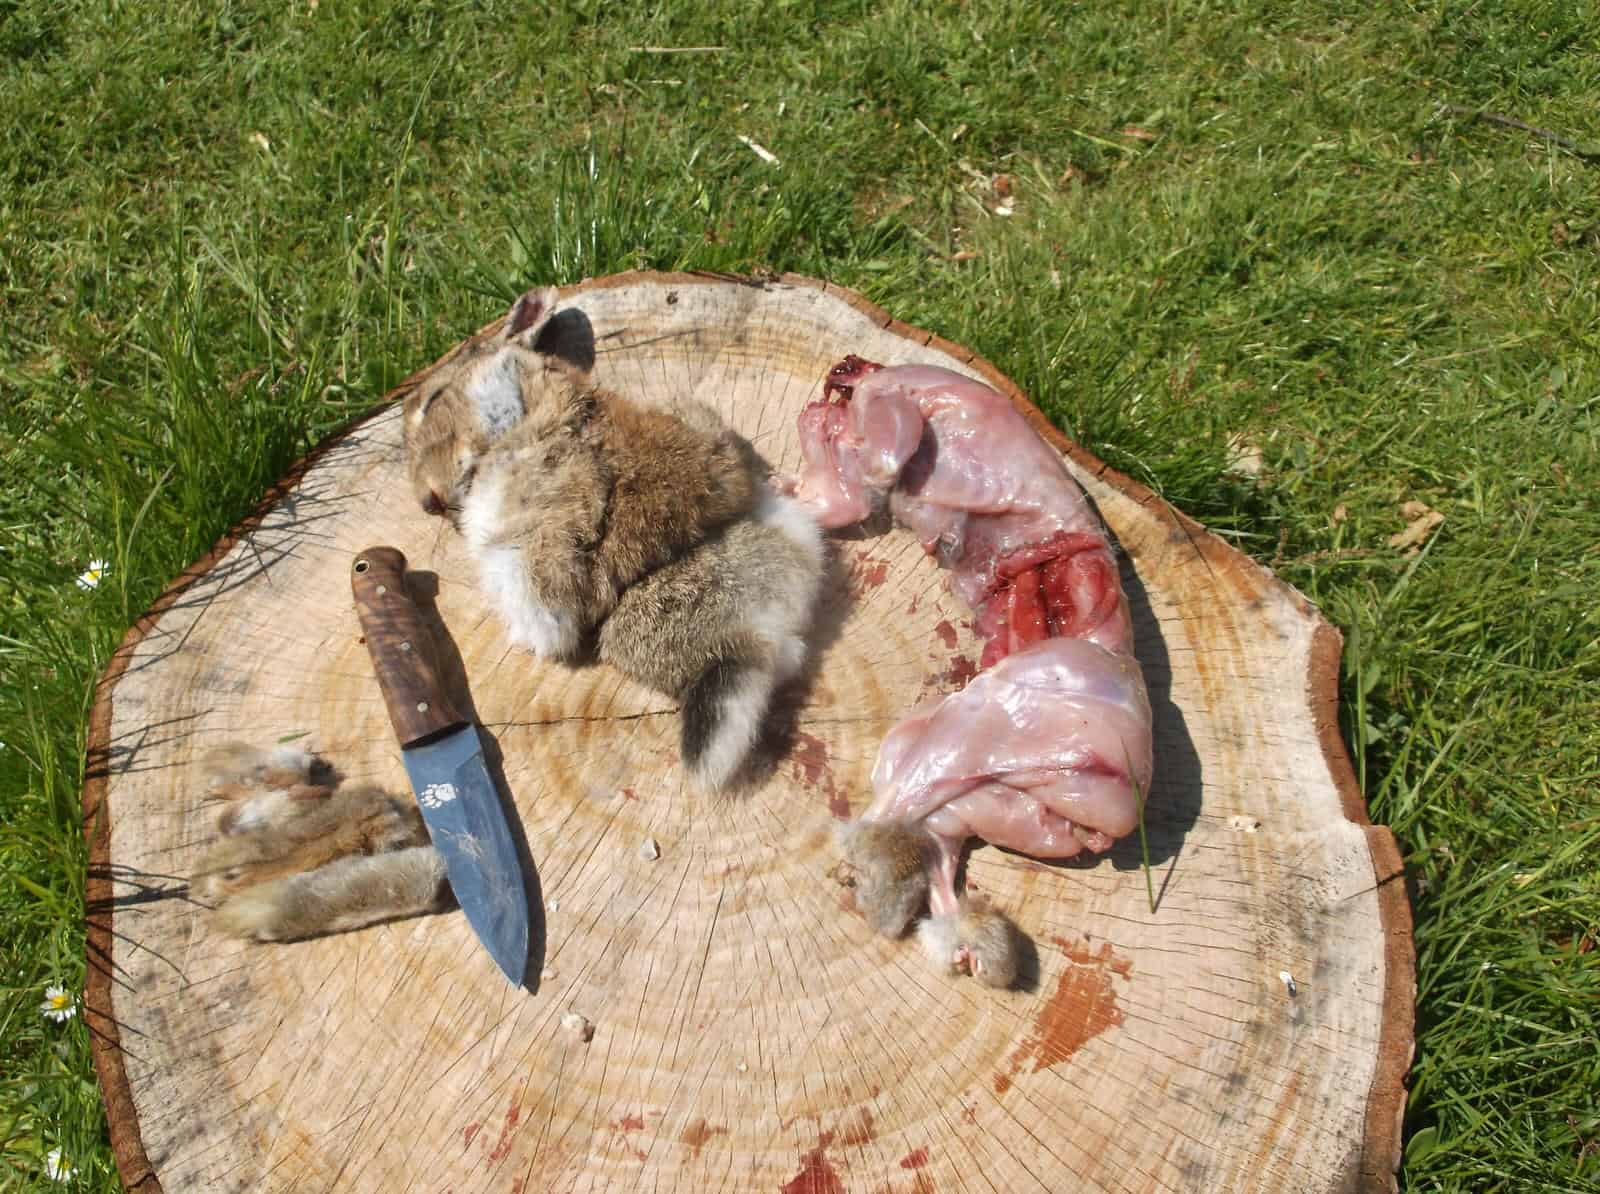 How To Skin And Butcher A Rabbit Dorset Bushcraft Courses for The Incredible as well as Beautiful how to skin a rabbit pertaining to Really encourage